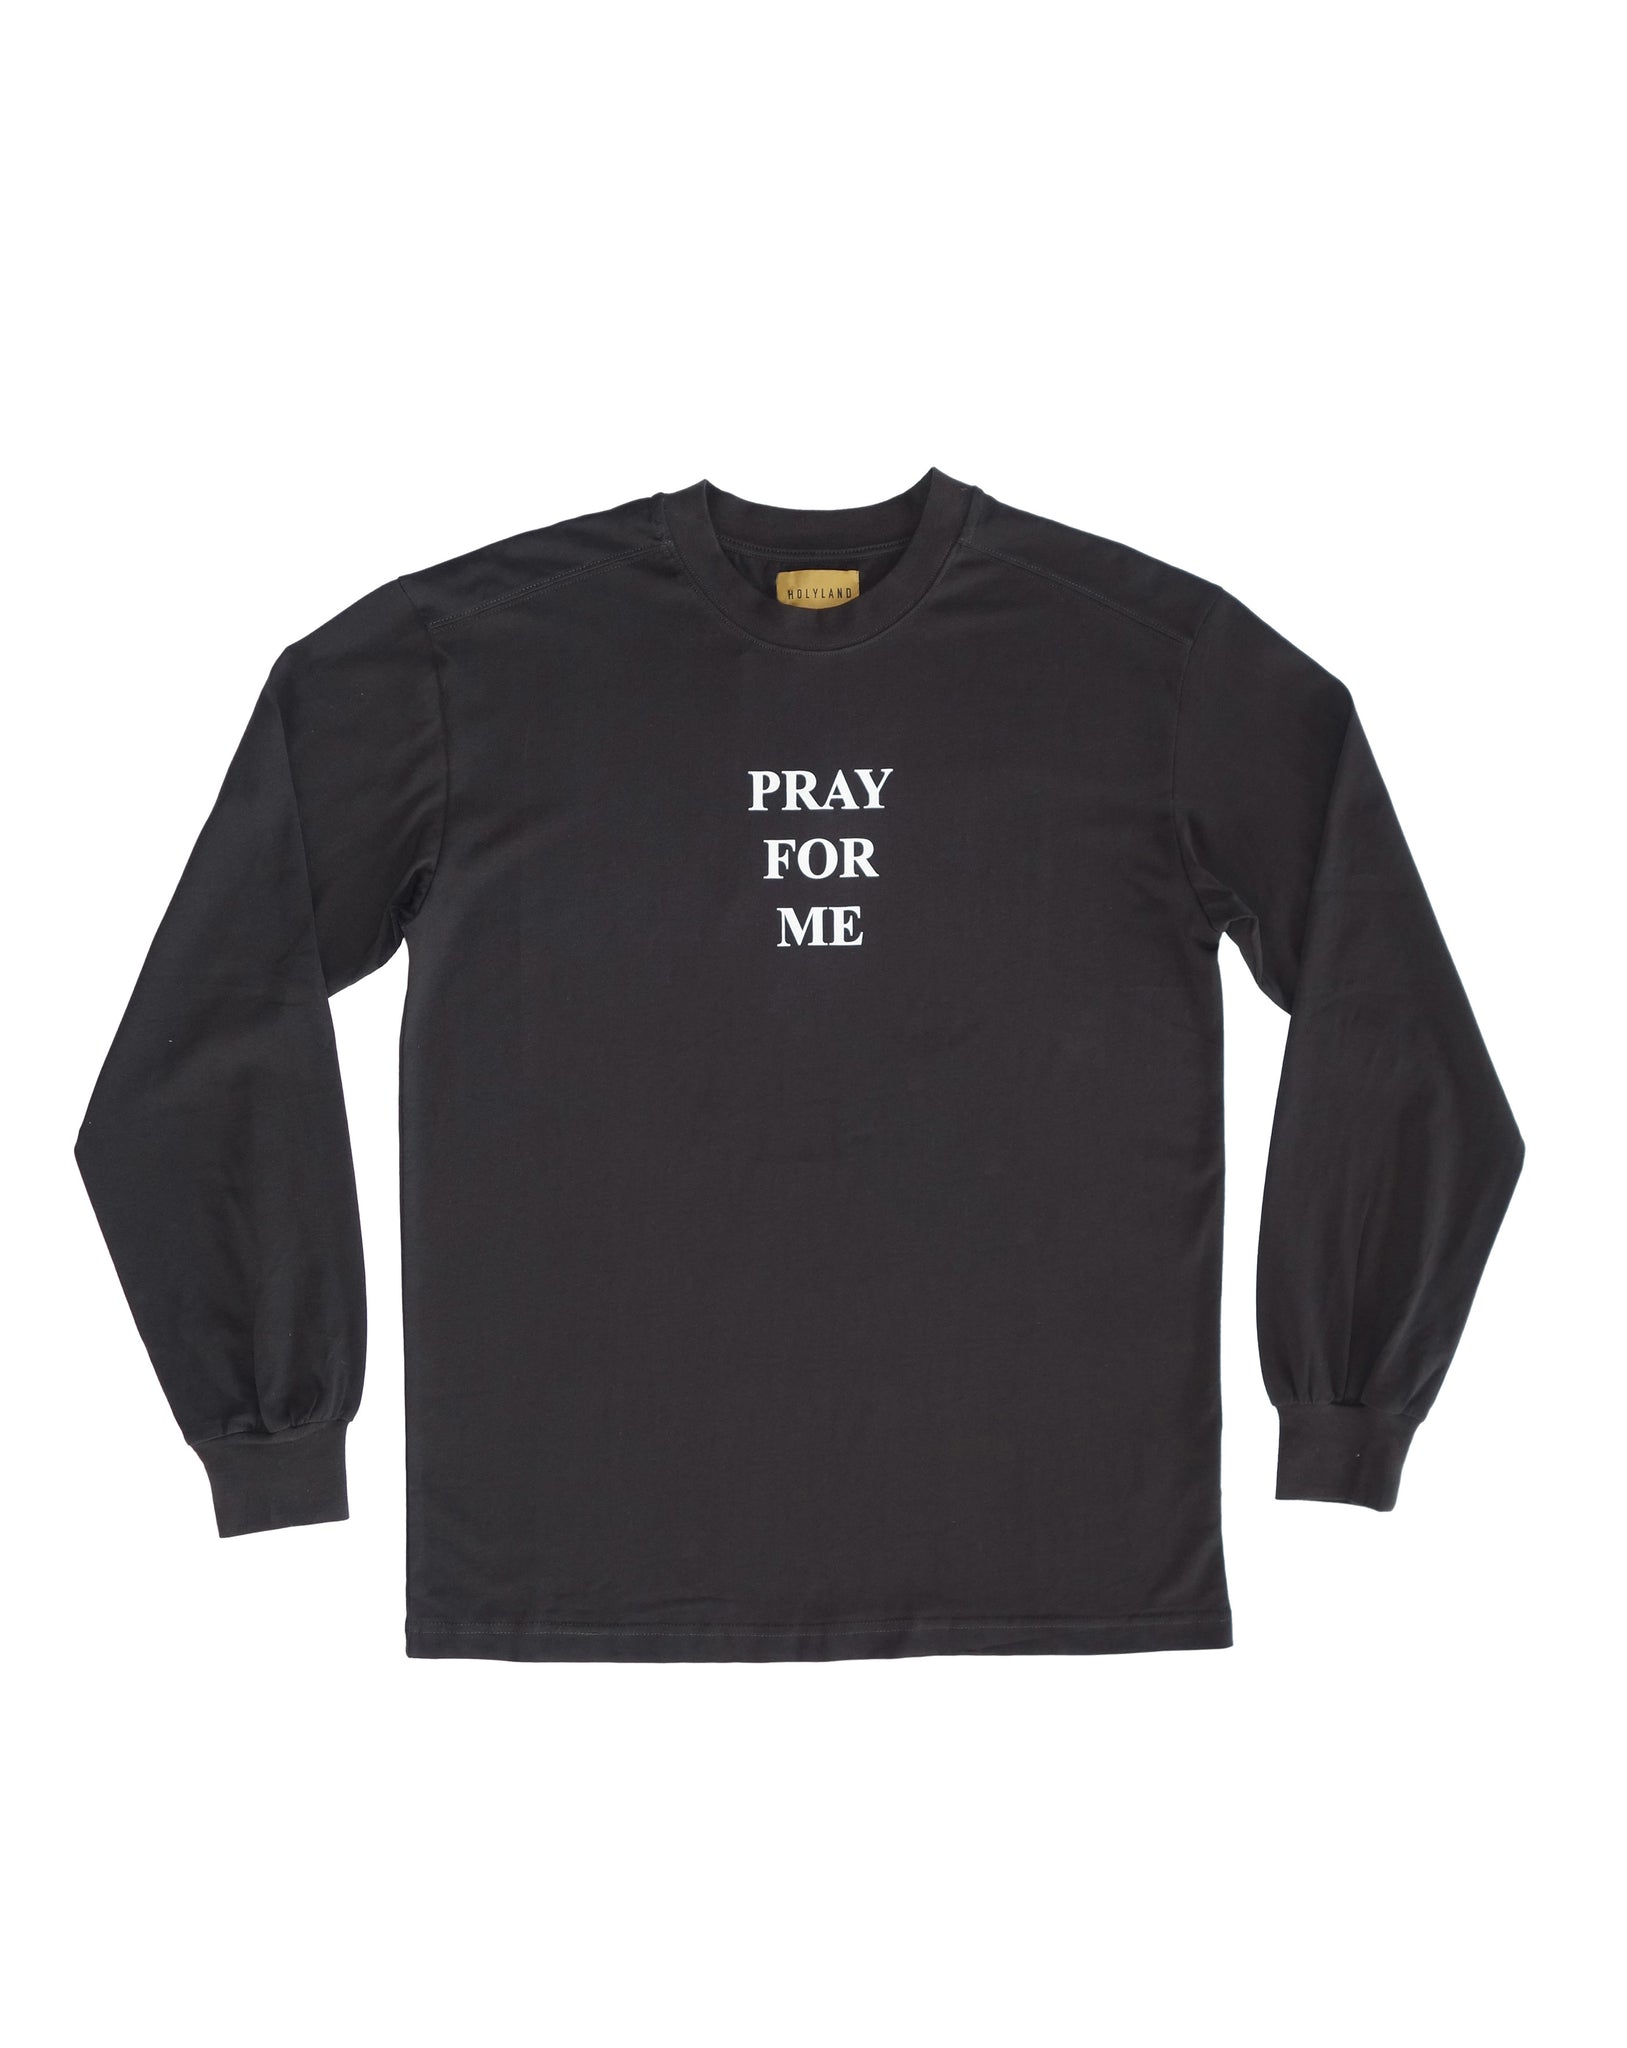 PRAY FOR ME LONG SLEEVE T HOLYLAND CIVILIANS IL